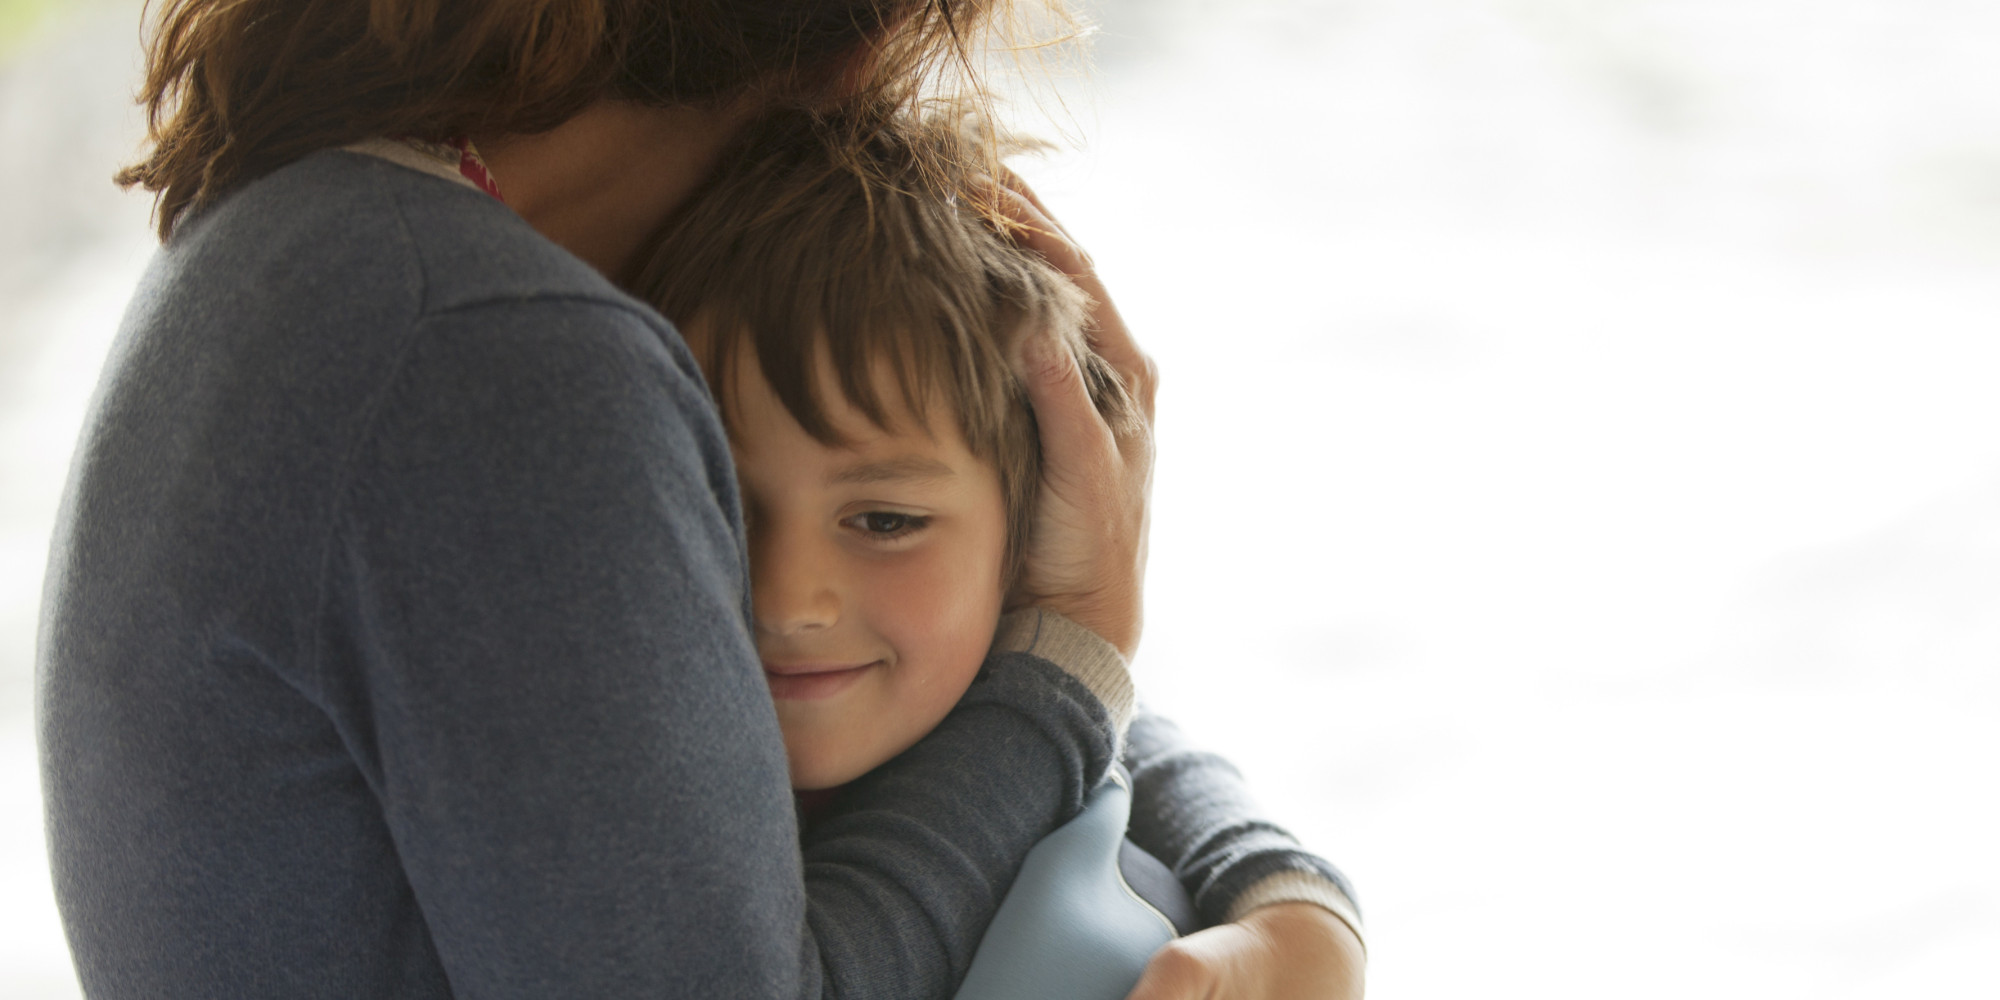 10 Things This Single Mom Wants Her Kids to Know | HuffPost2000 x 1000